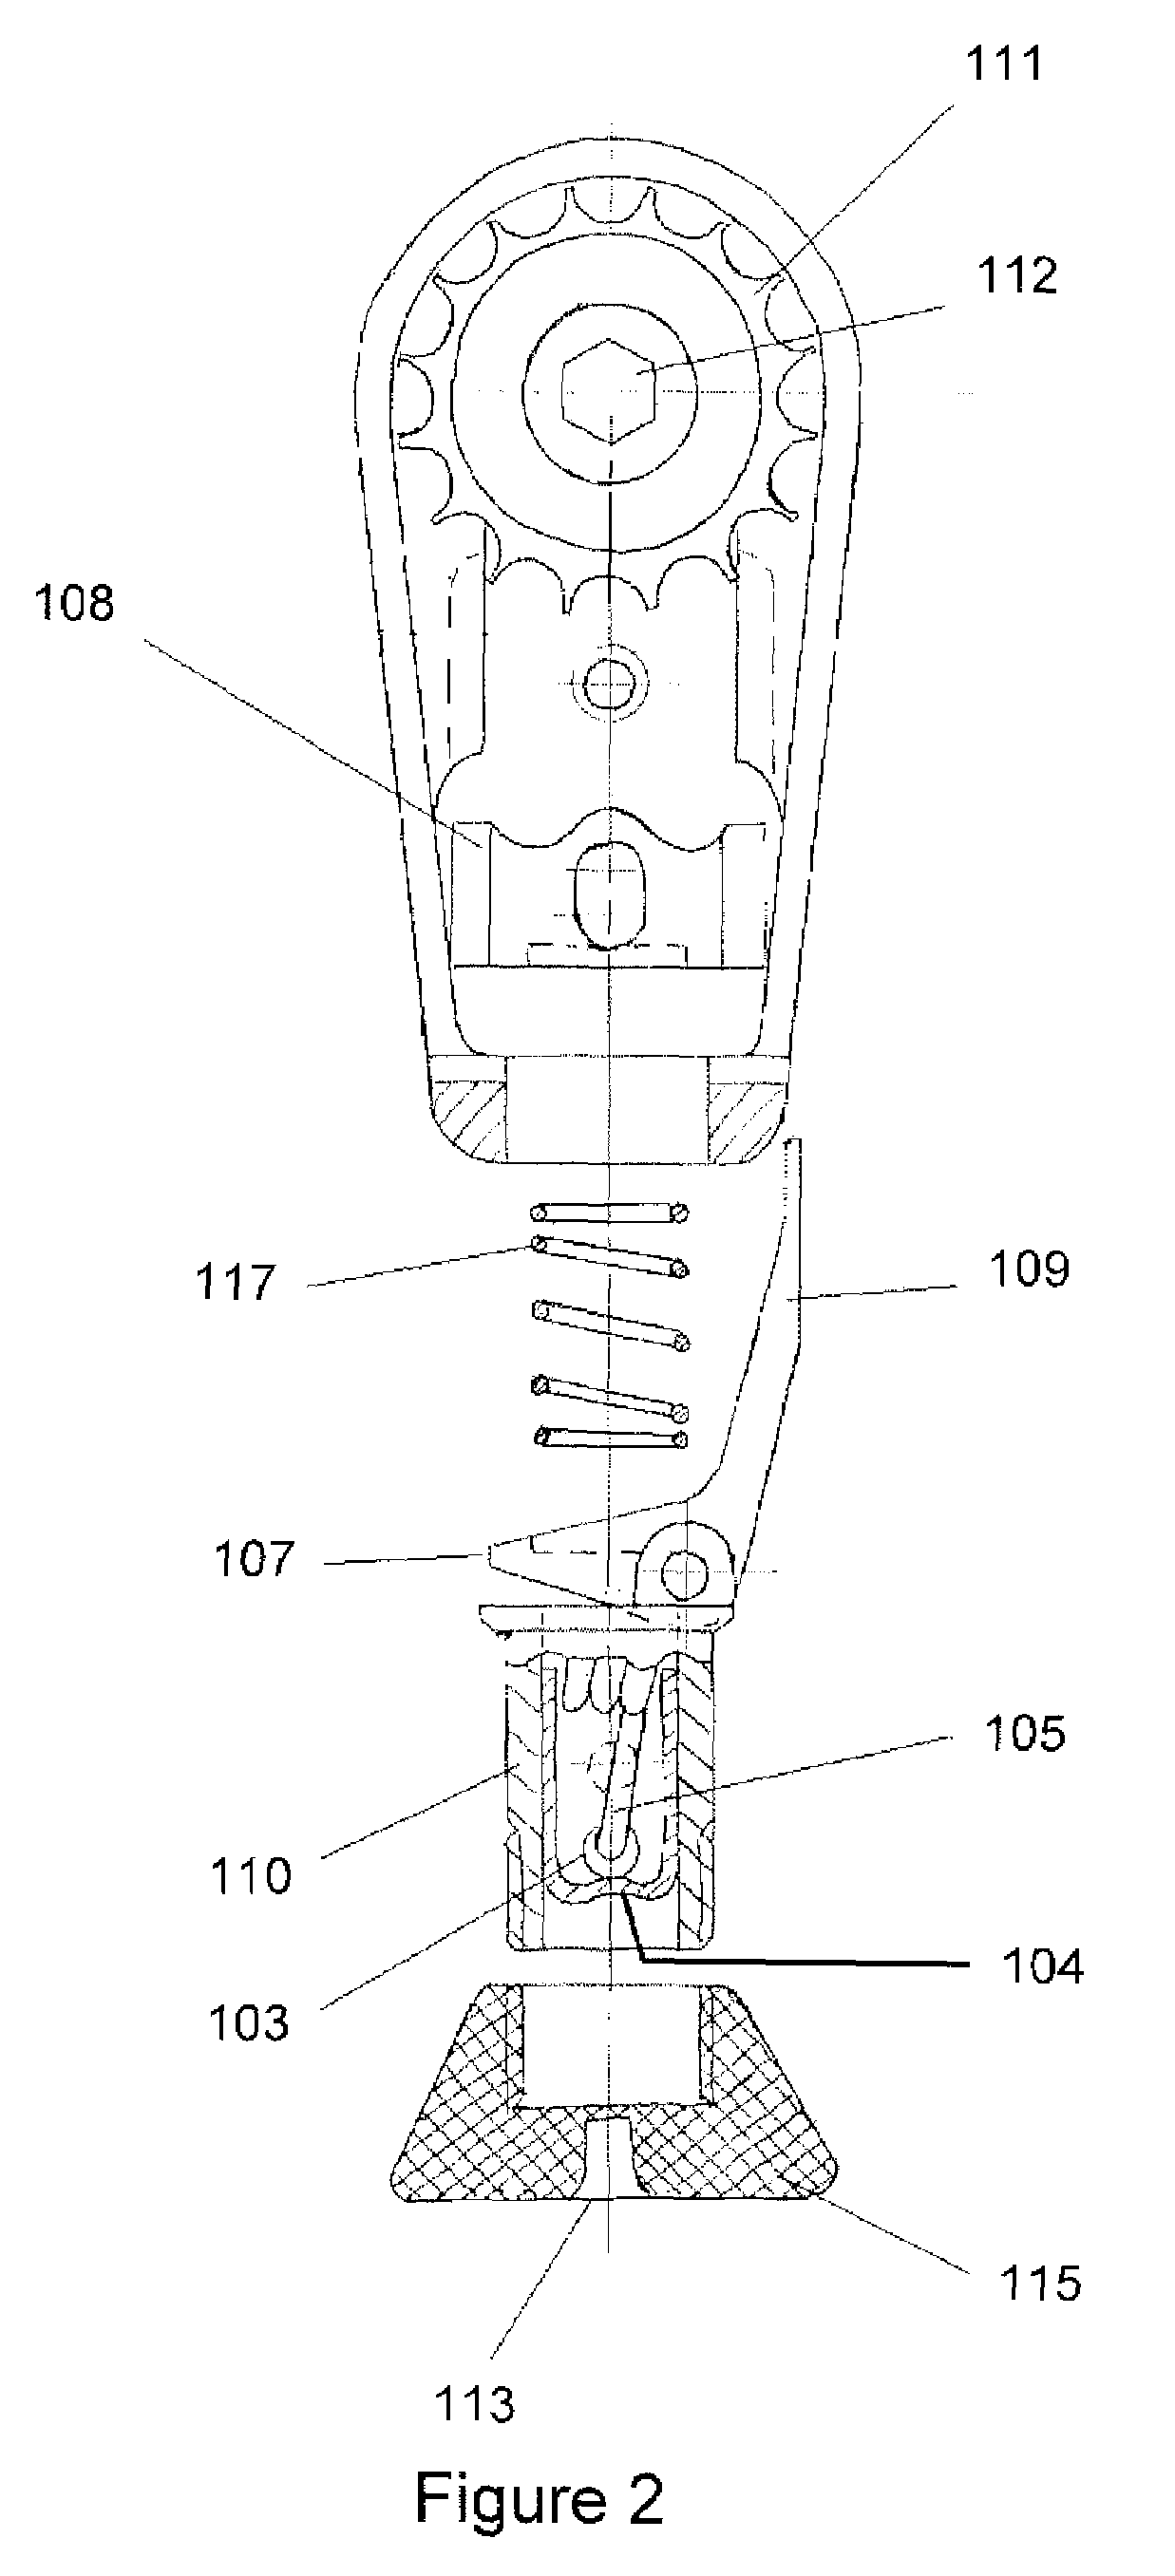 Intramedullar distraction device with user actuated distraction